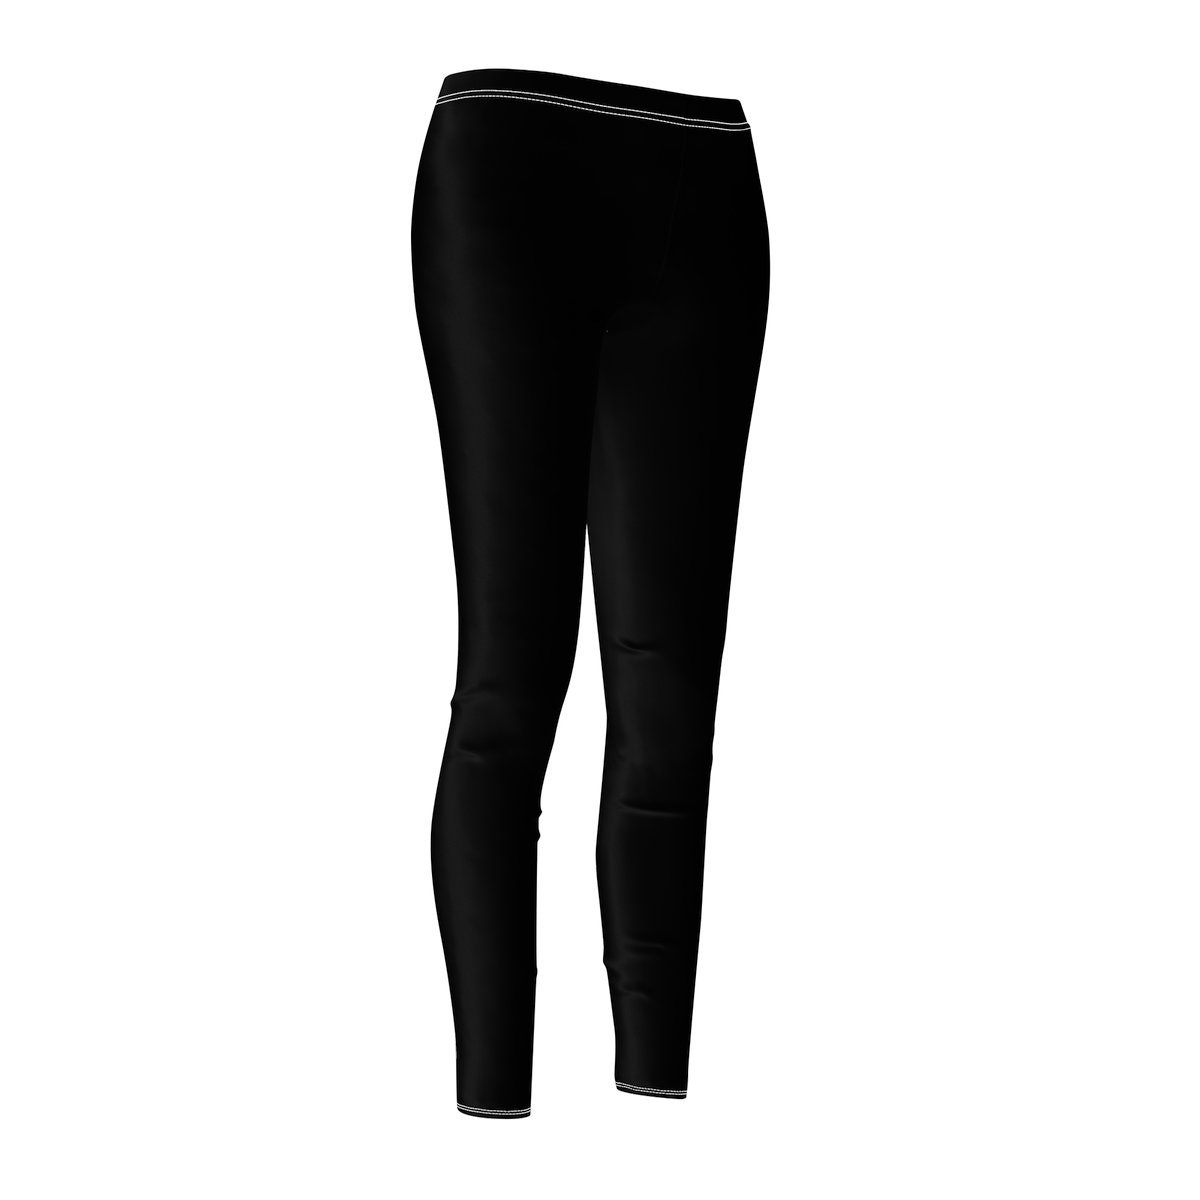 Black Women''s Casual Leggings. Pants Are Solid Black. It is a ...